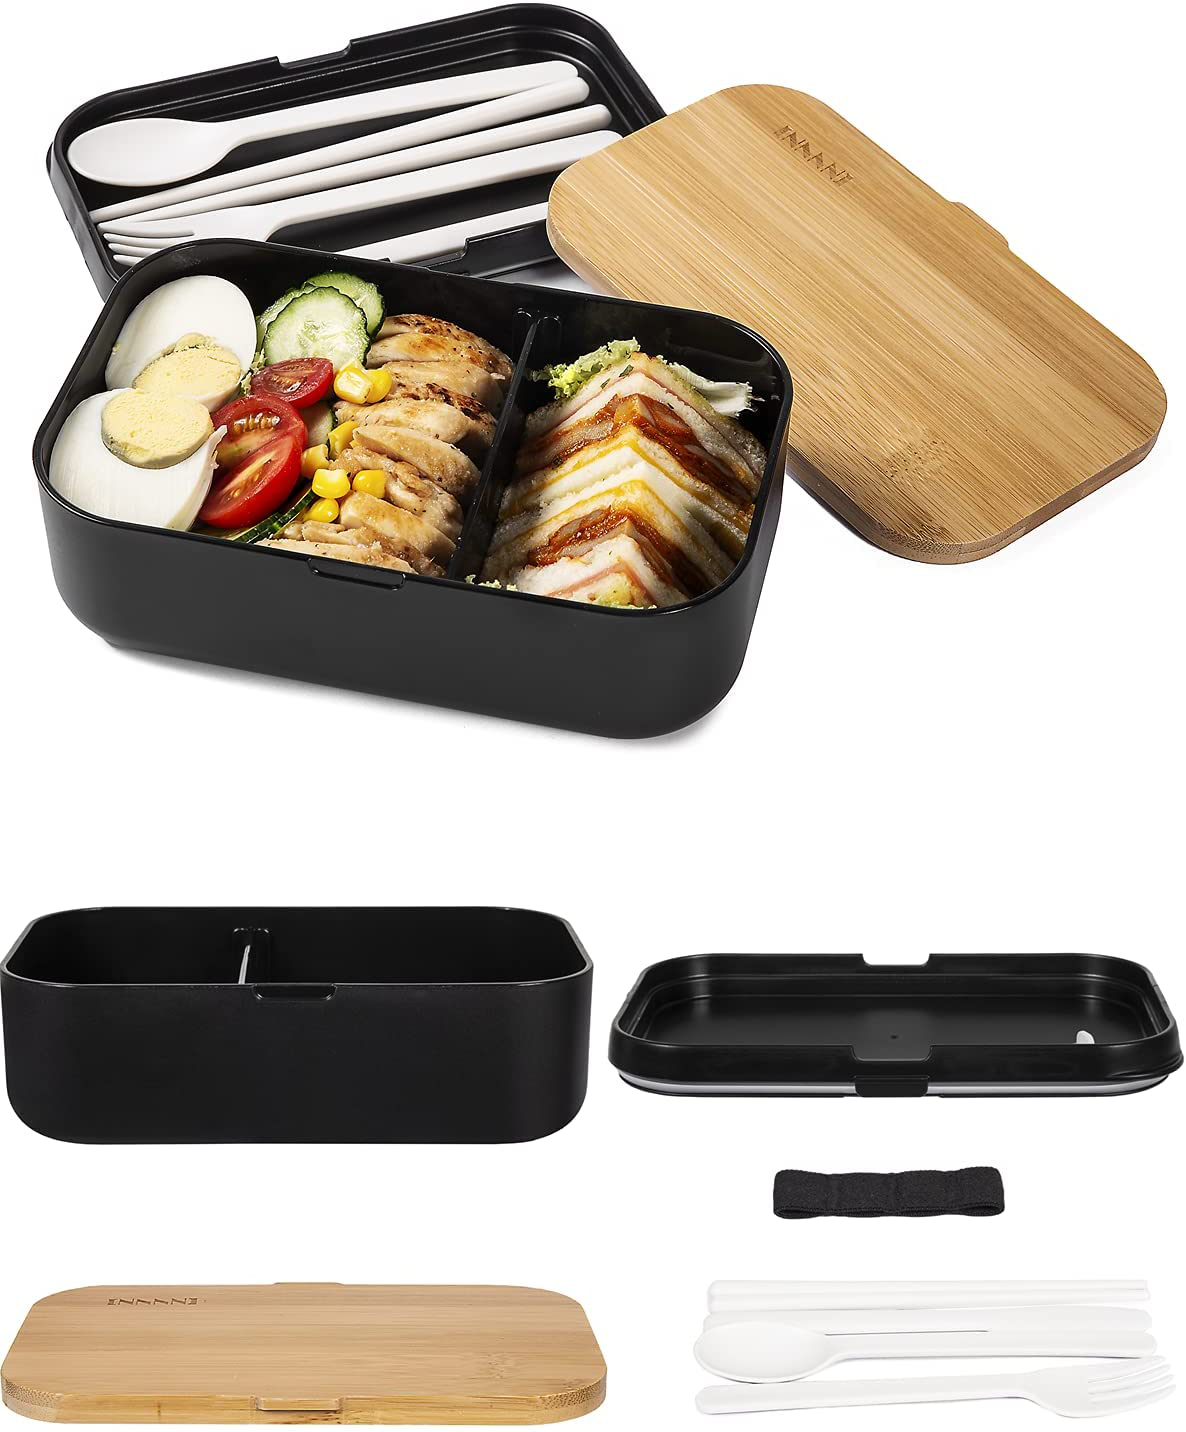 INVVNI Japanese Bento Box Adult Lunch Bamboo Containers for Kids Black (Large 68 Oz Capacity)- Microwave safe, Bpa free, Leakproof, Men Women